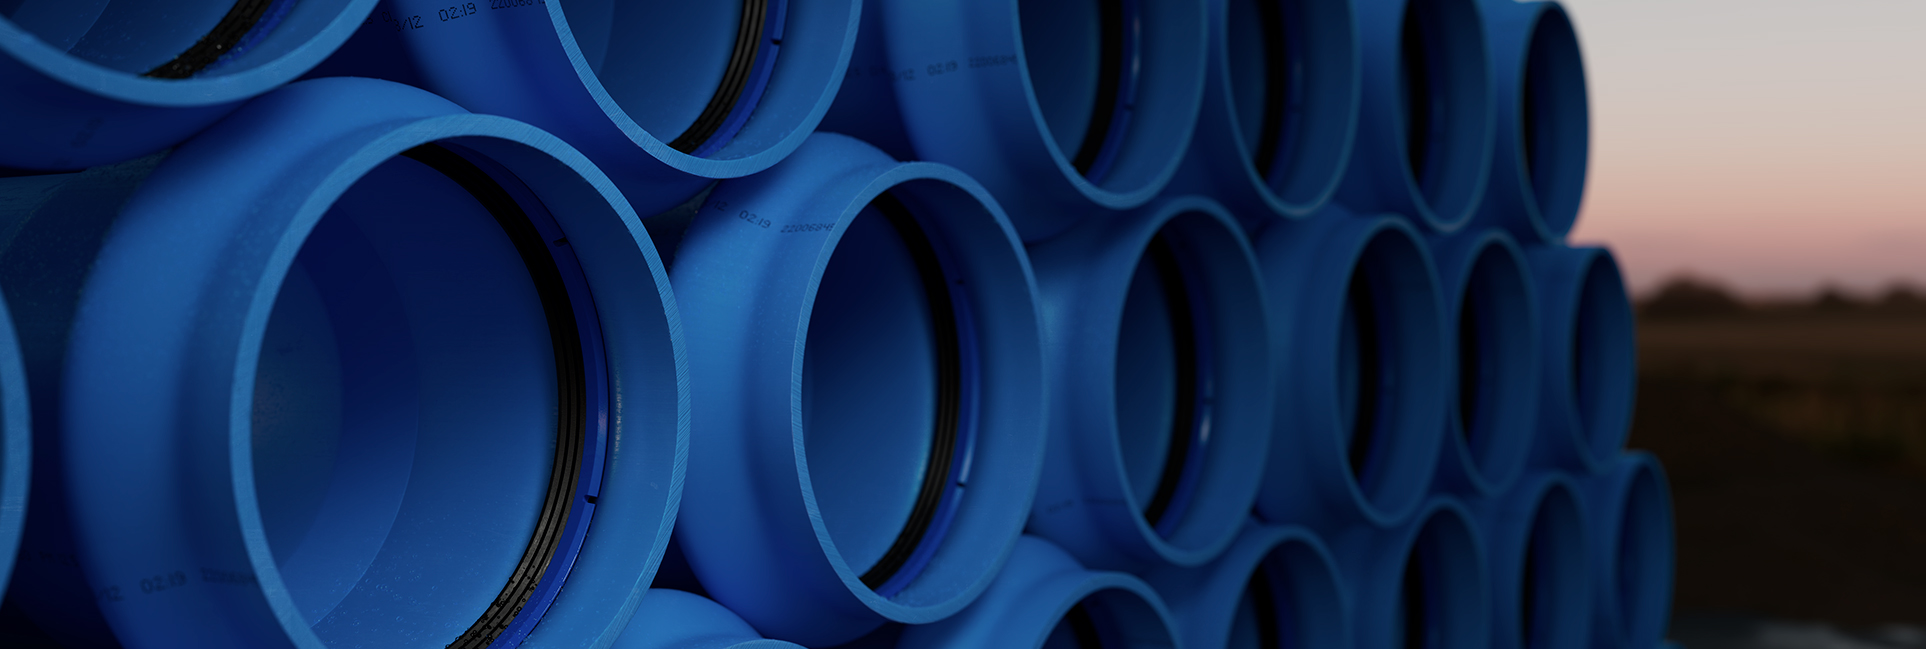 Stacked plastic pipes with angerlock seals